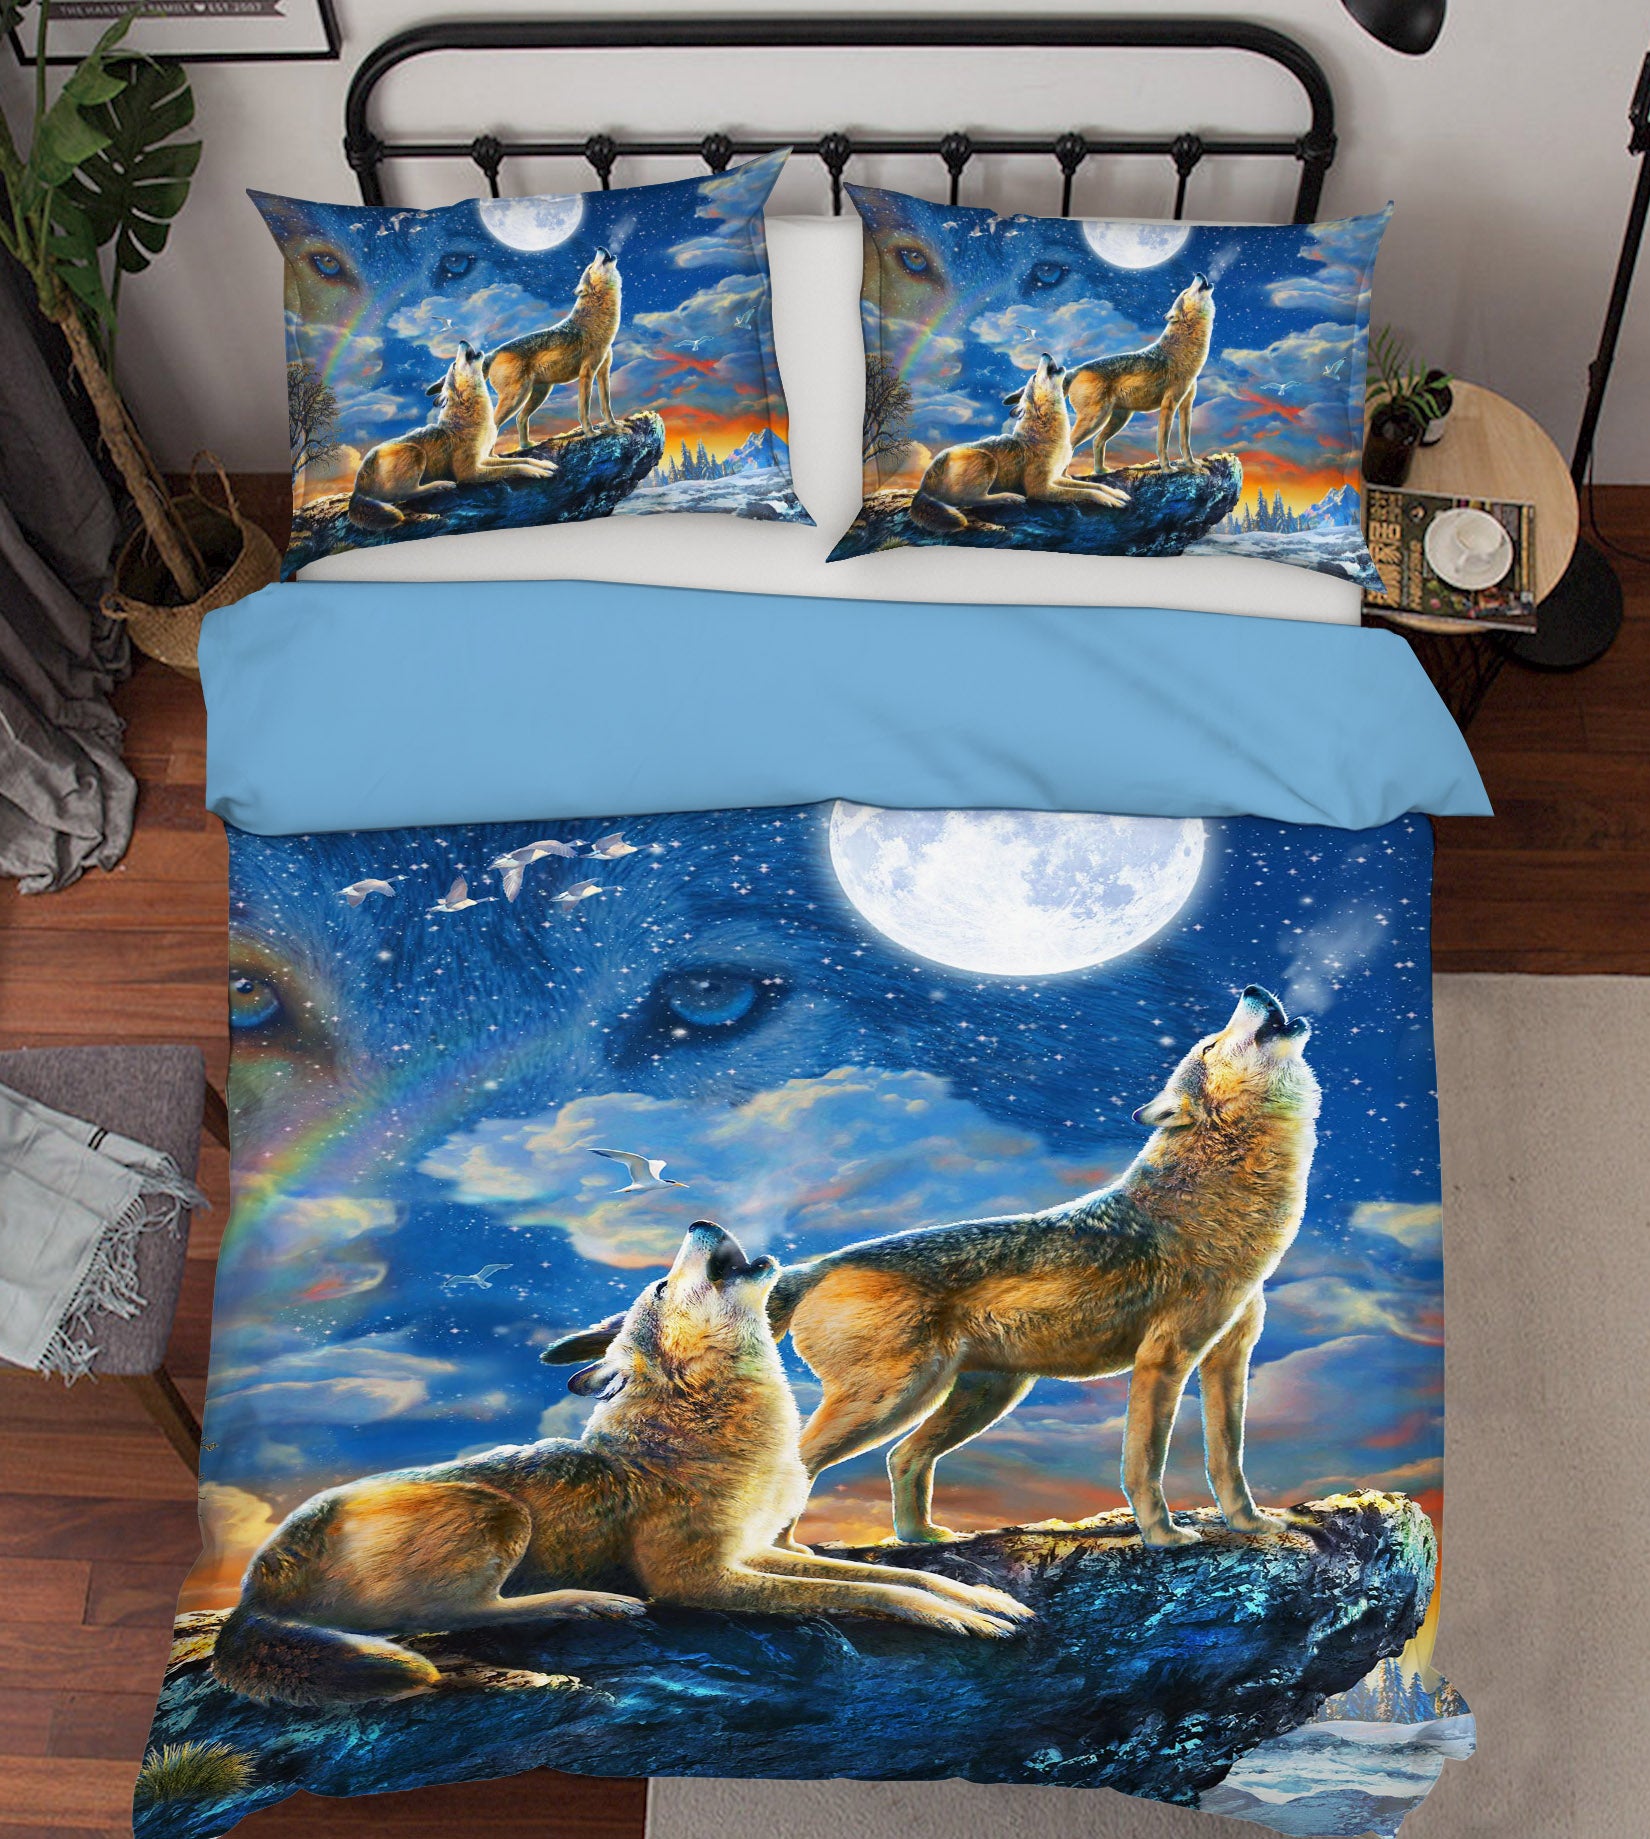 3D Wolverine 2134 Adrian Chesterman Bedding Bed Pillowcases Quilt